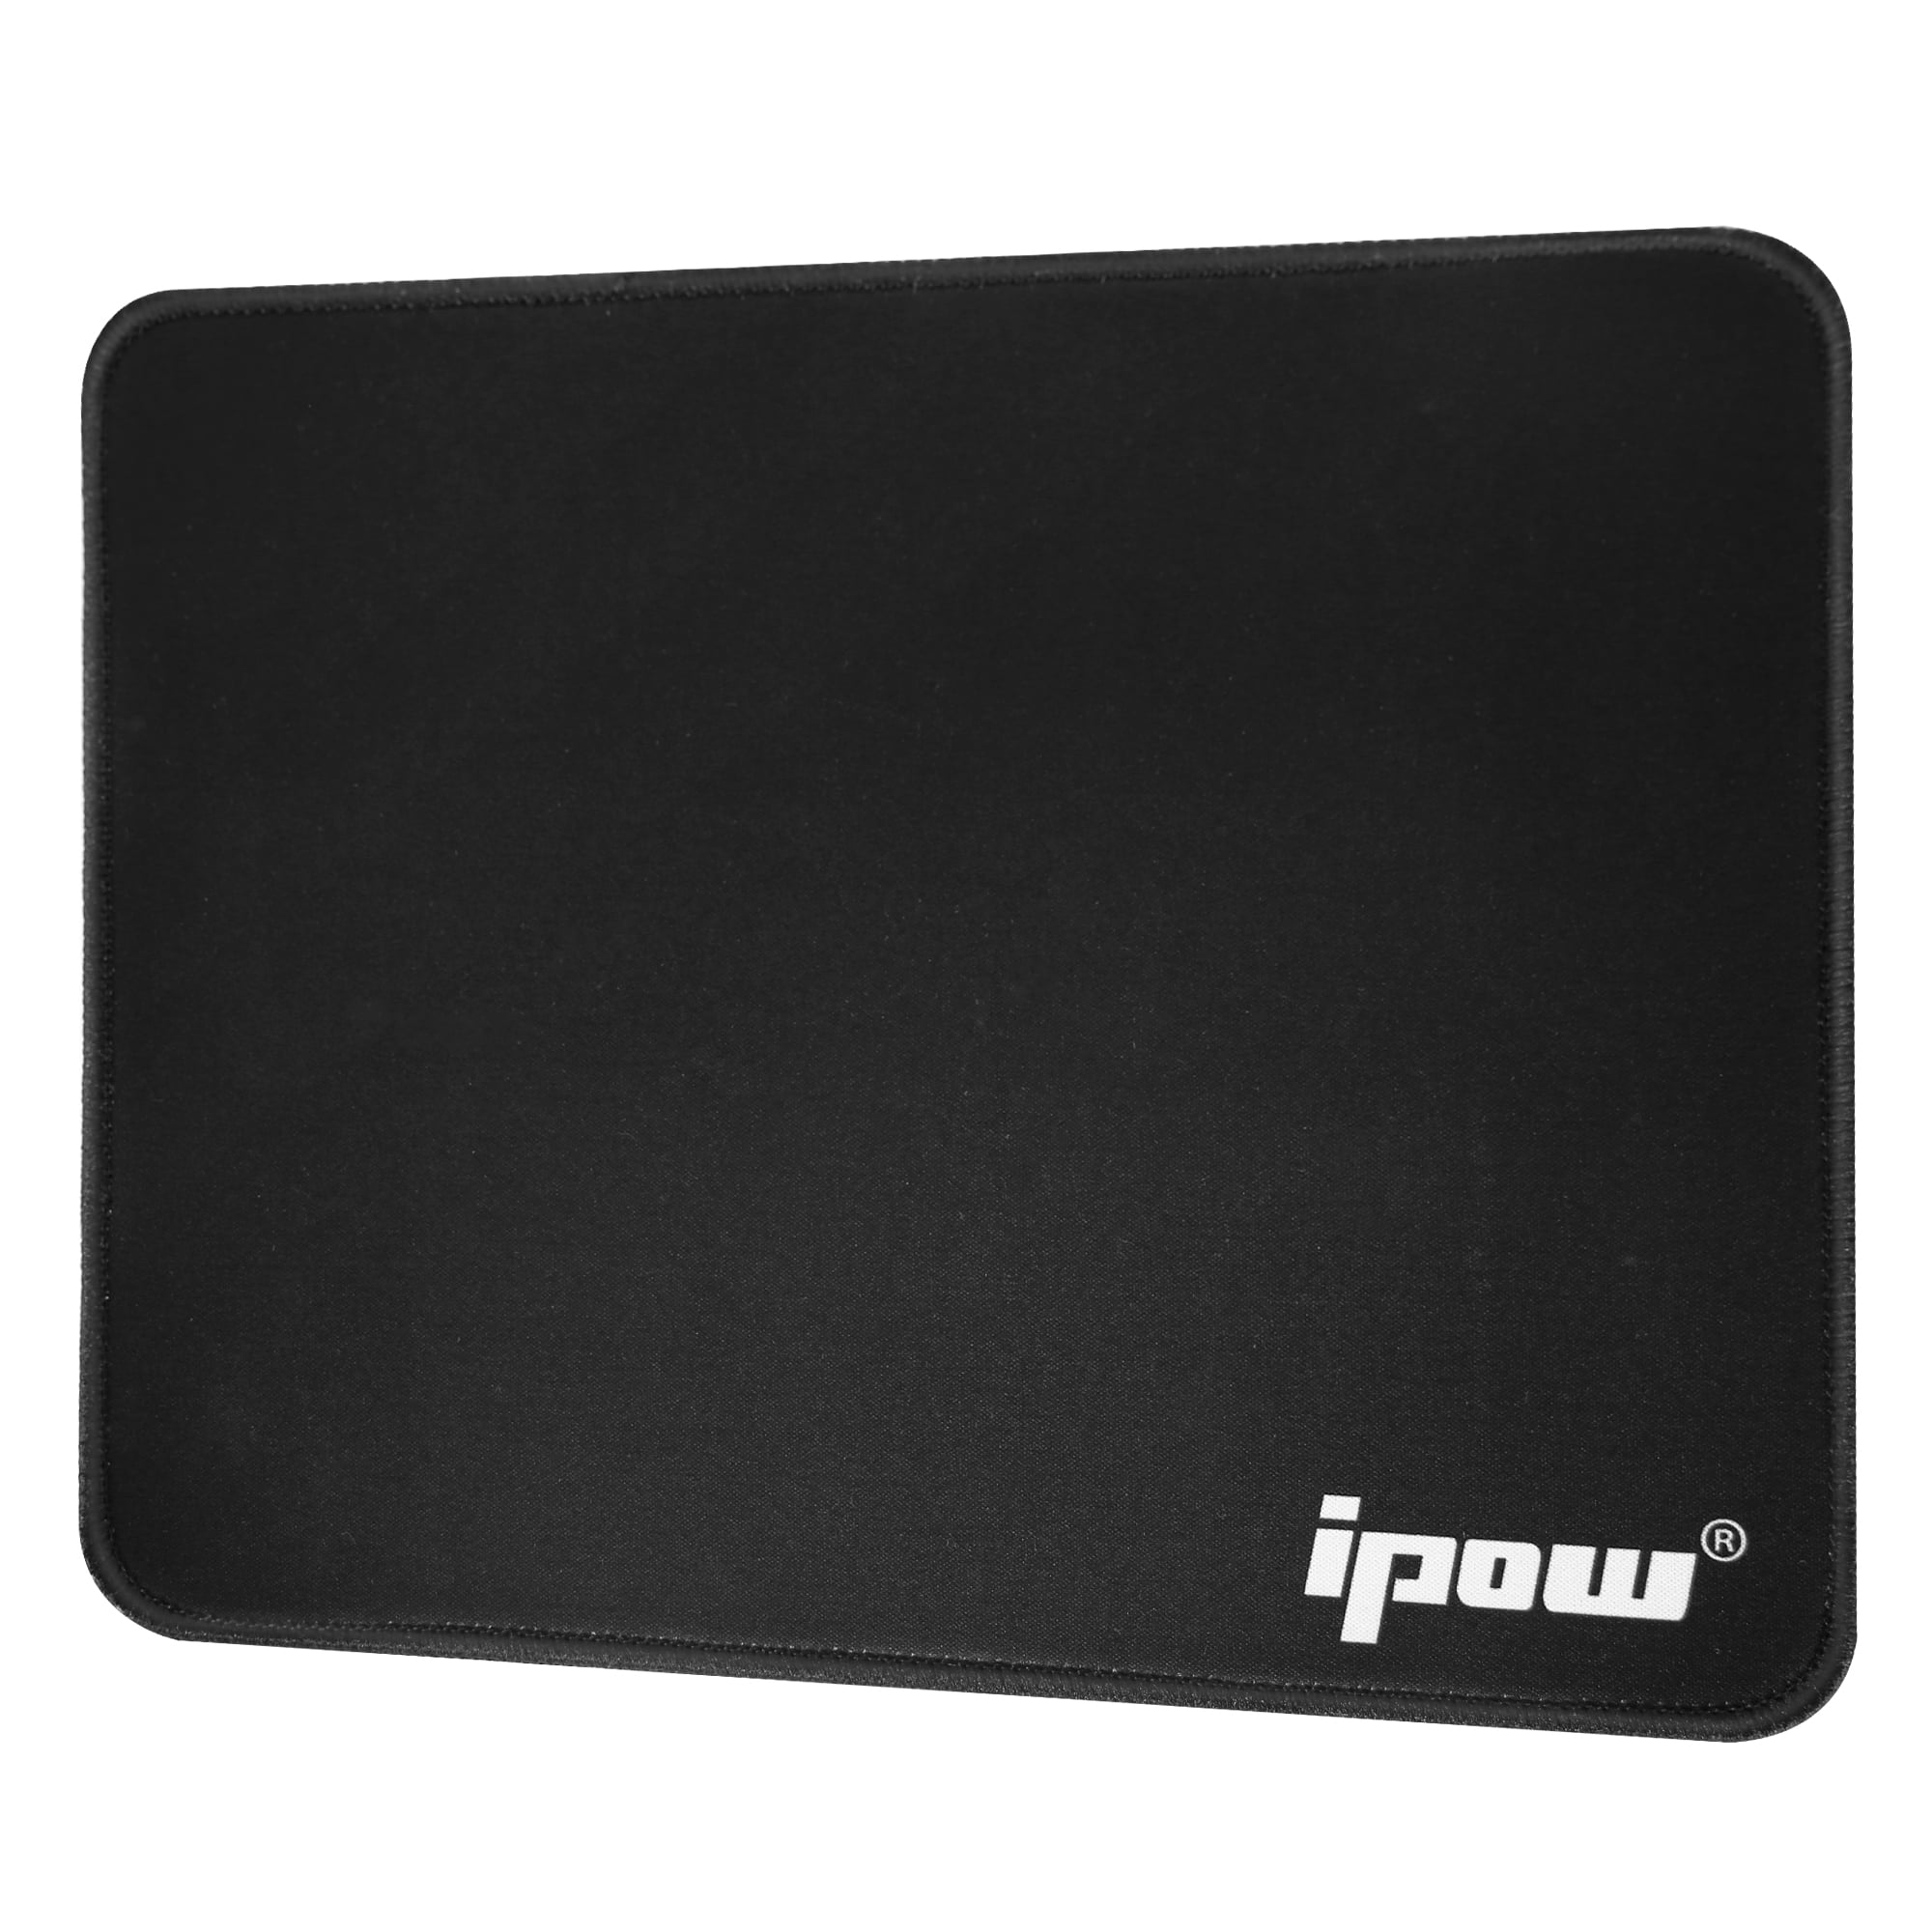 Air Force Academy Mouse Pad with Stitched Edge,Computer Mouse Pad with Non Slip Rubber Base,Air Force Academy Mouse Pads for Computers Laptop Mouse 